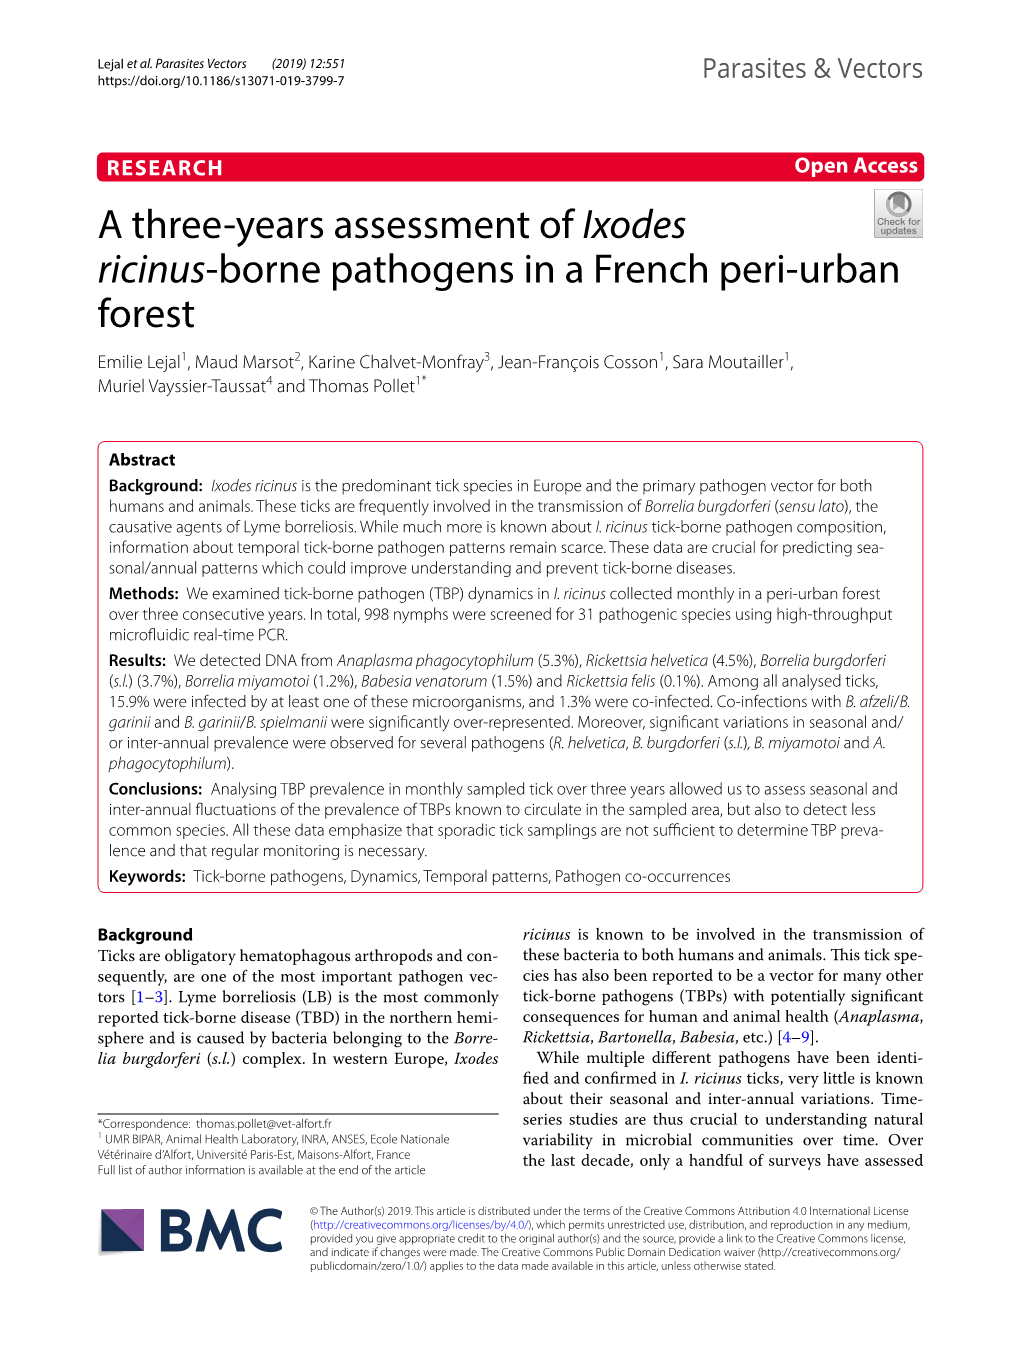 A Three-Years Assessment of Ixodes Ricinus-Borne Pathogens in A